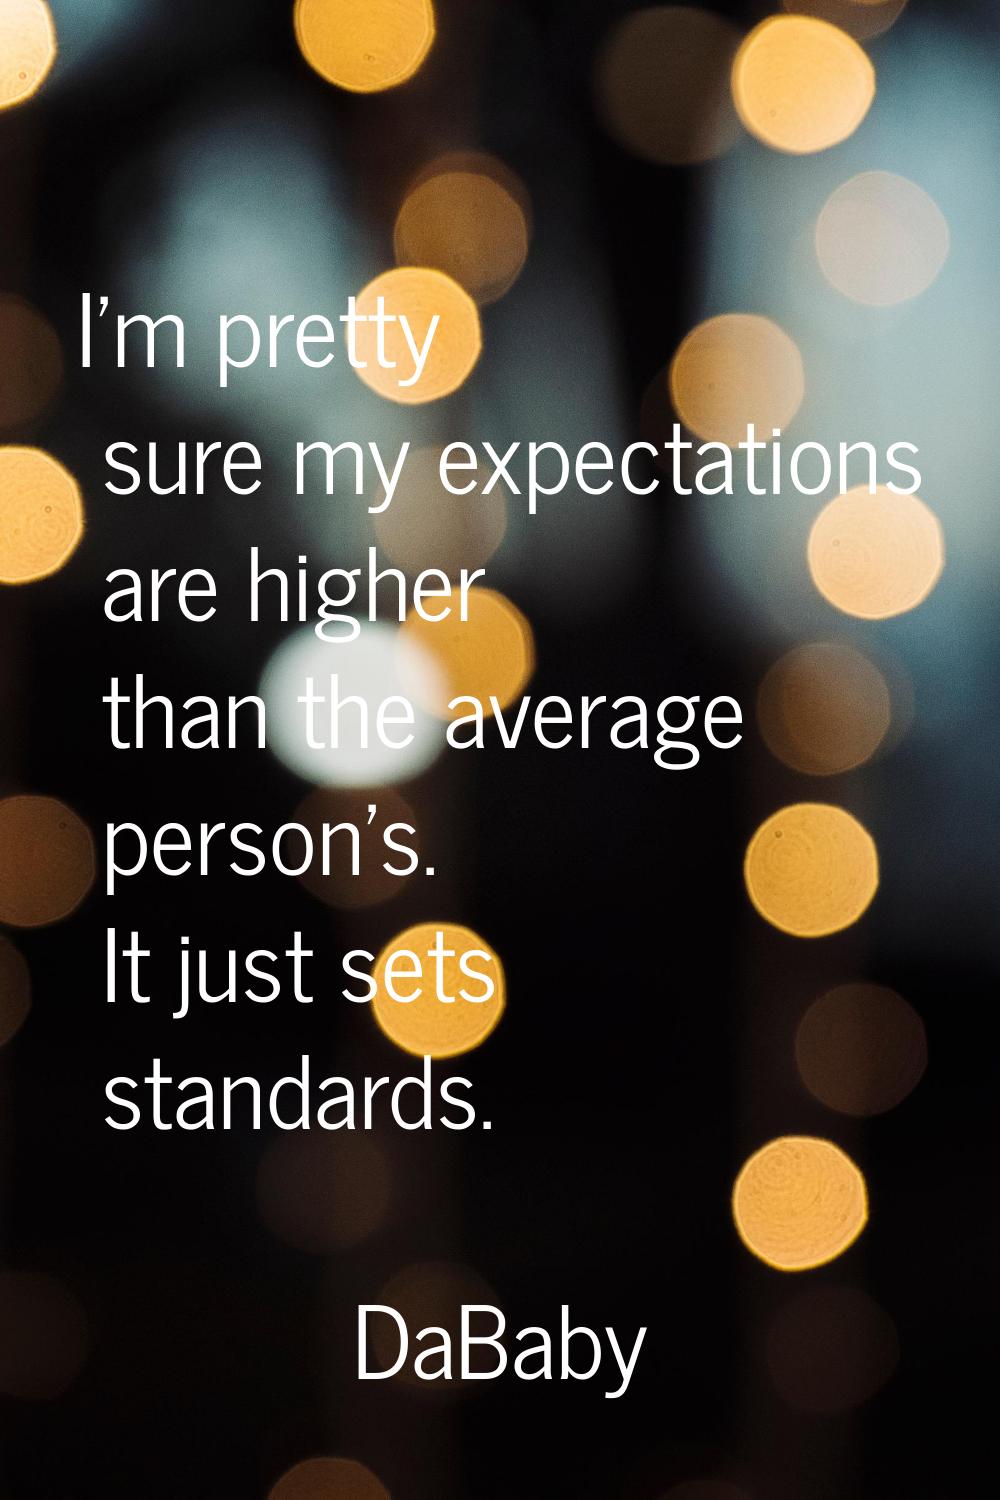 I'm pretty sure my expectations are higher than the average person's. It just sets standards.